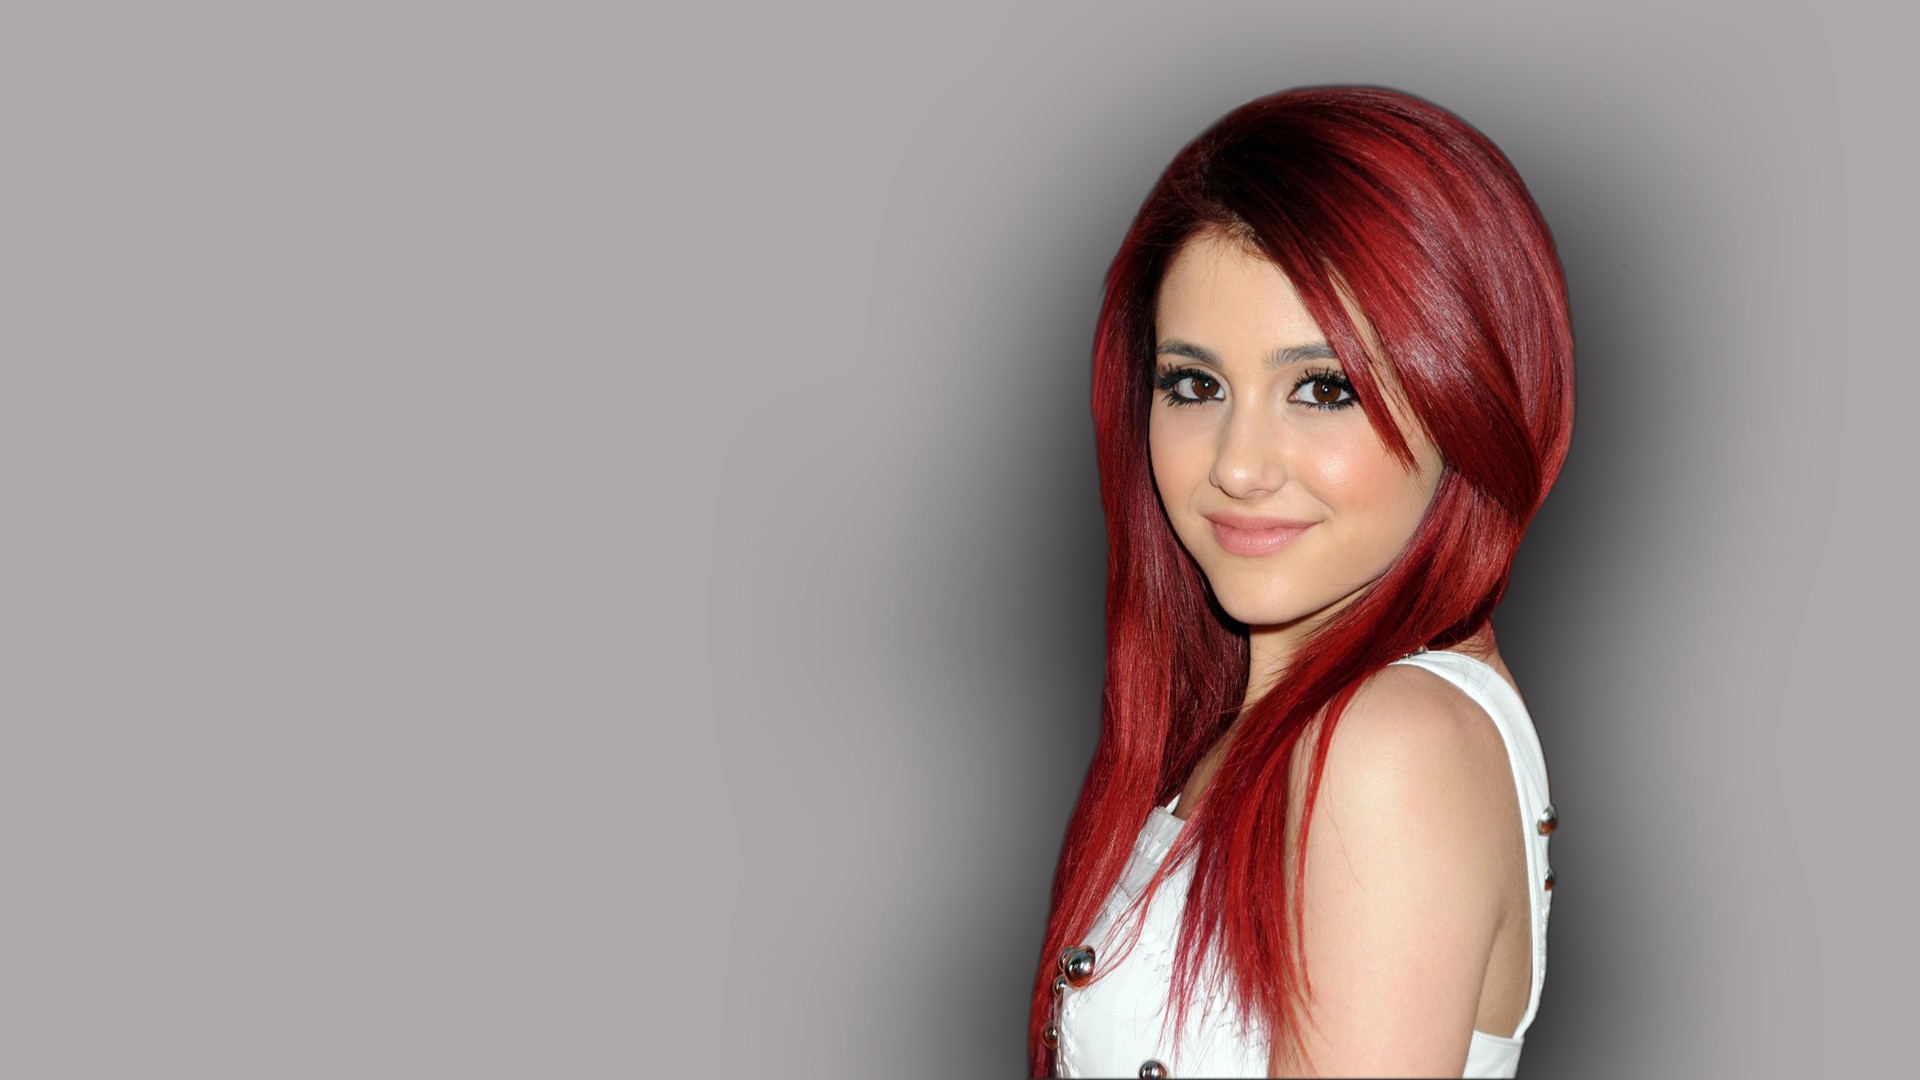 ariana grande wallpaper,hair,face,red,hair coloring,hairstyle